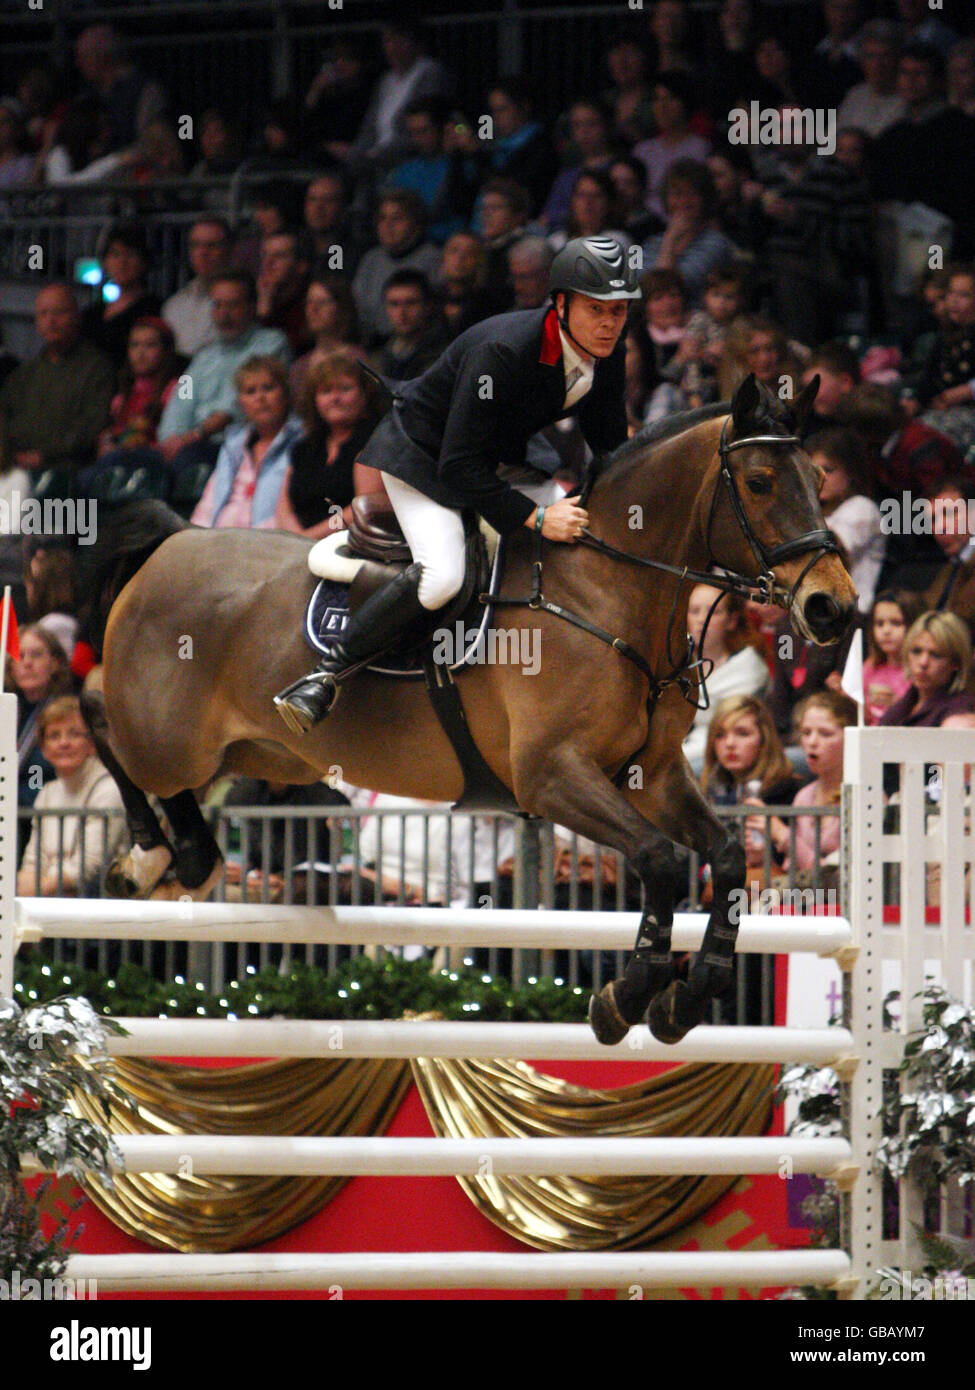 Mikael Forsten from Finland riding Vanity 16 competes in the KBIS Christmas Pudding Speed Stakes on the third day of Olympia The London International Horse Show being held at the Olympia Exhibition Centre in West London. Stock Photo